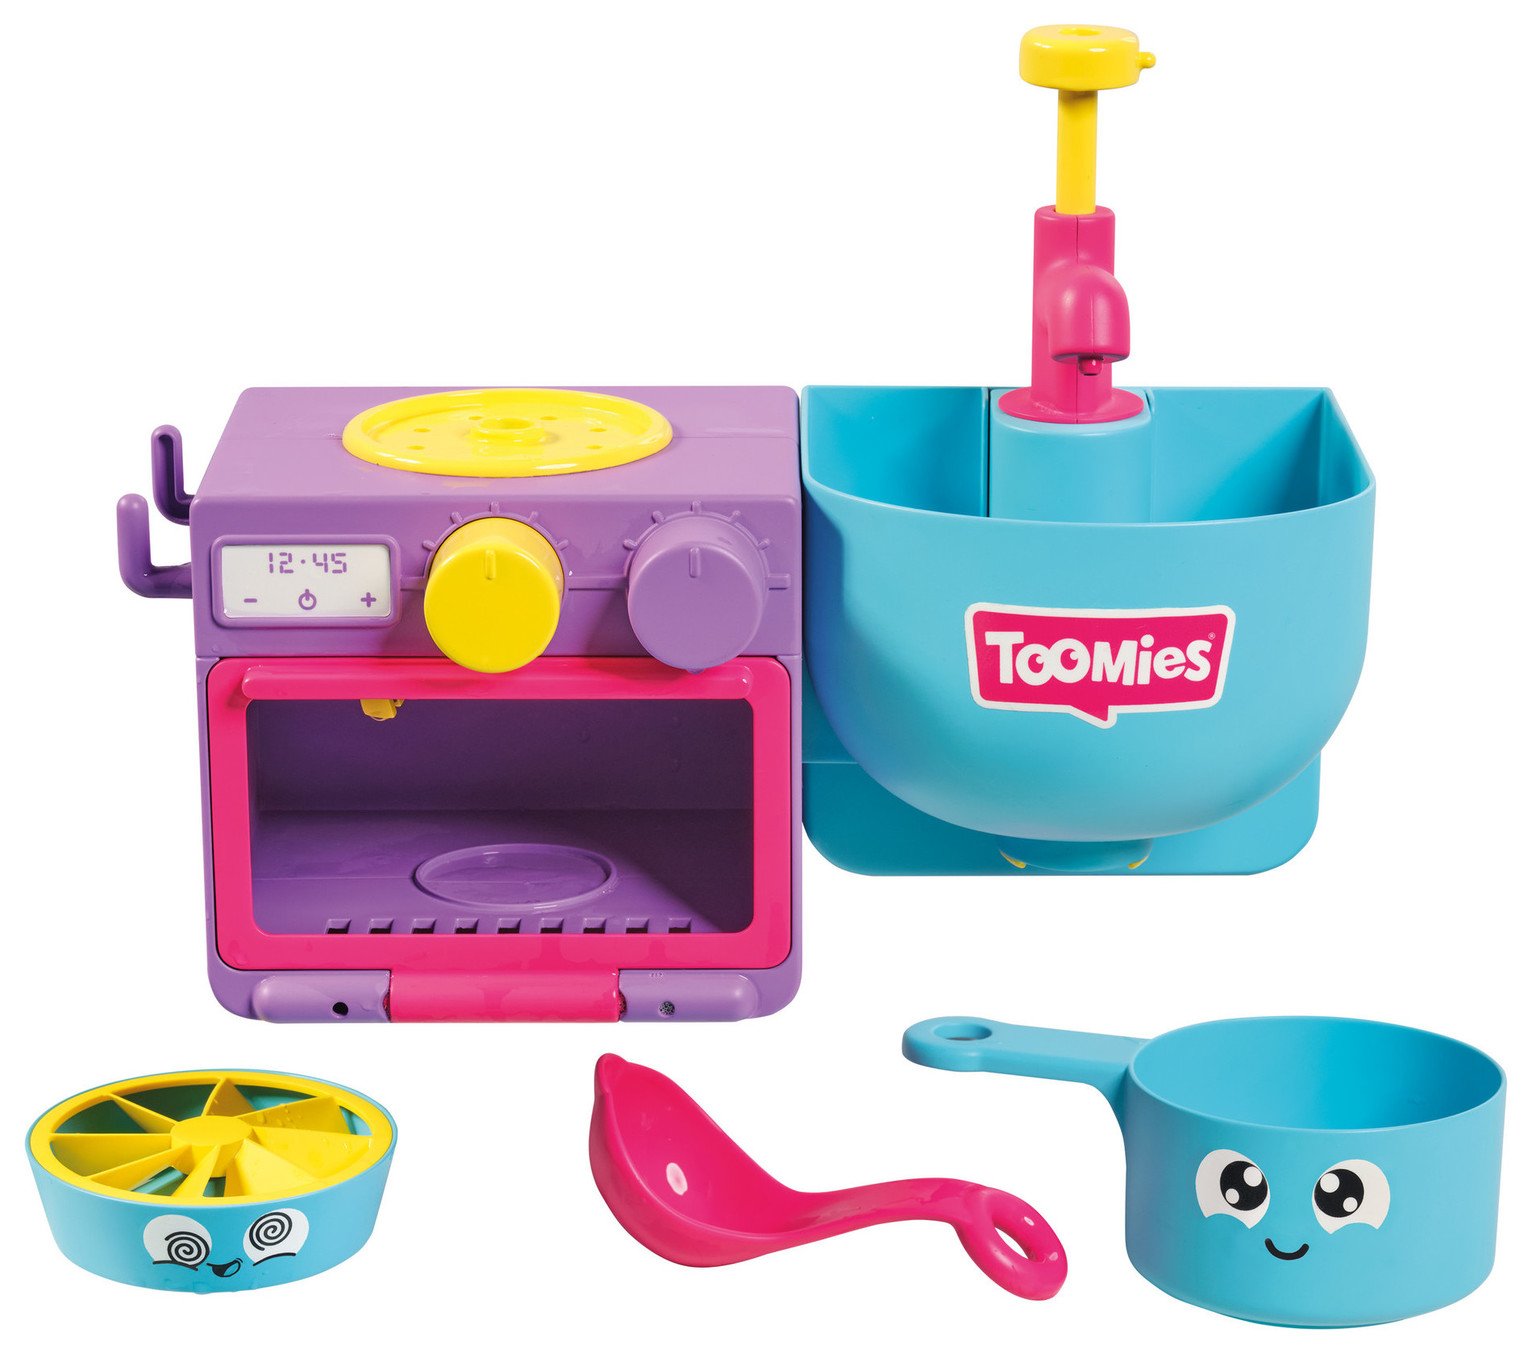 Tomy Toomies Bubble and Bake Bathtime Kitchen review